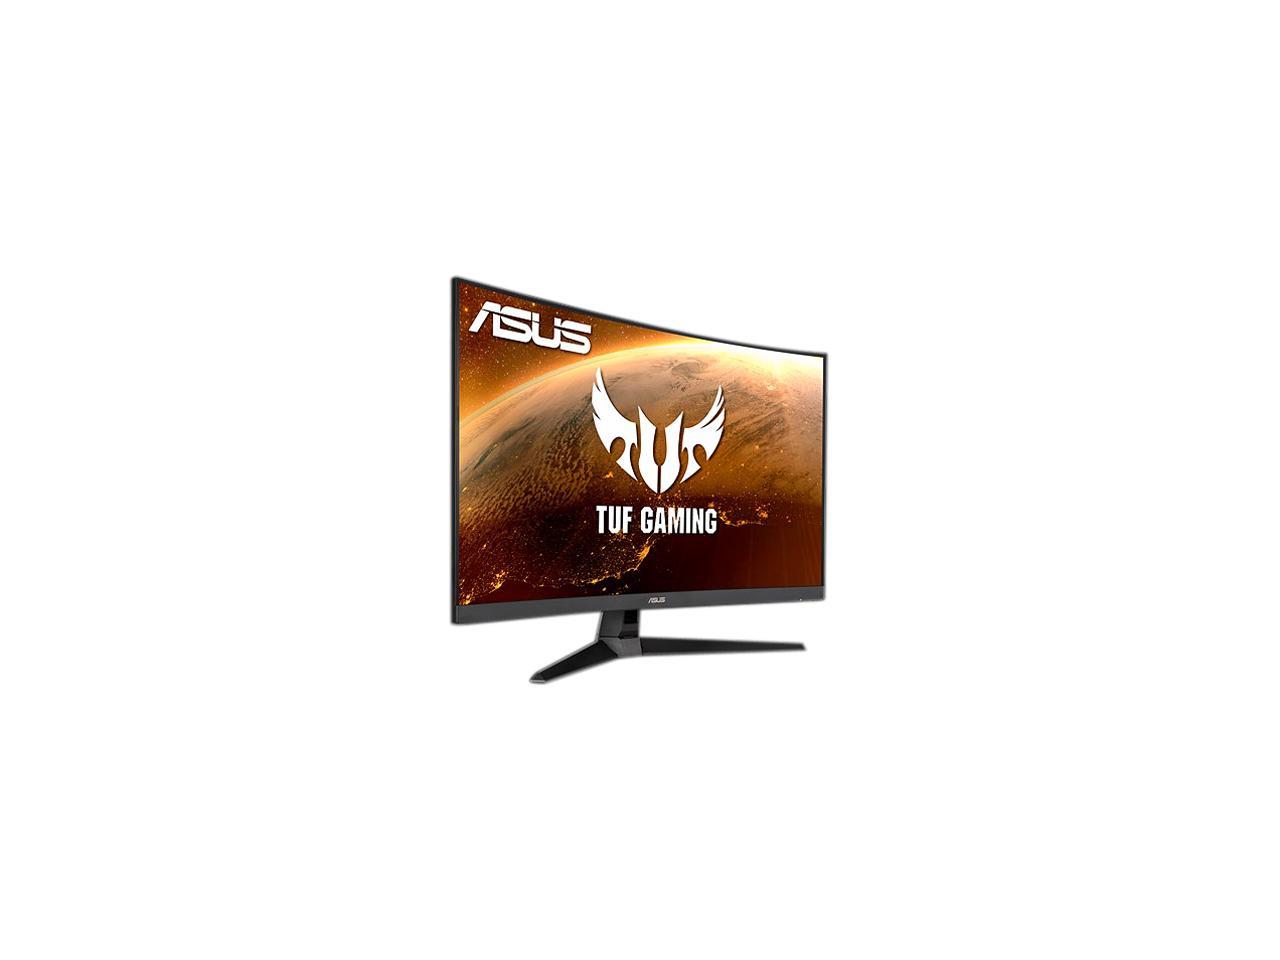 ASUS TUF Gaming VG328H1B 32" Full HD 1920 x 1080 165Hz (OC) 1ms (MPRT) HDMI VGA Extreme Low Motion Blur FreeSync Flicker-Free Built-in Speakers Backlit LED Curved Gaming Monitor